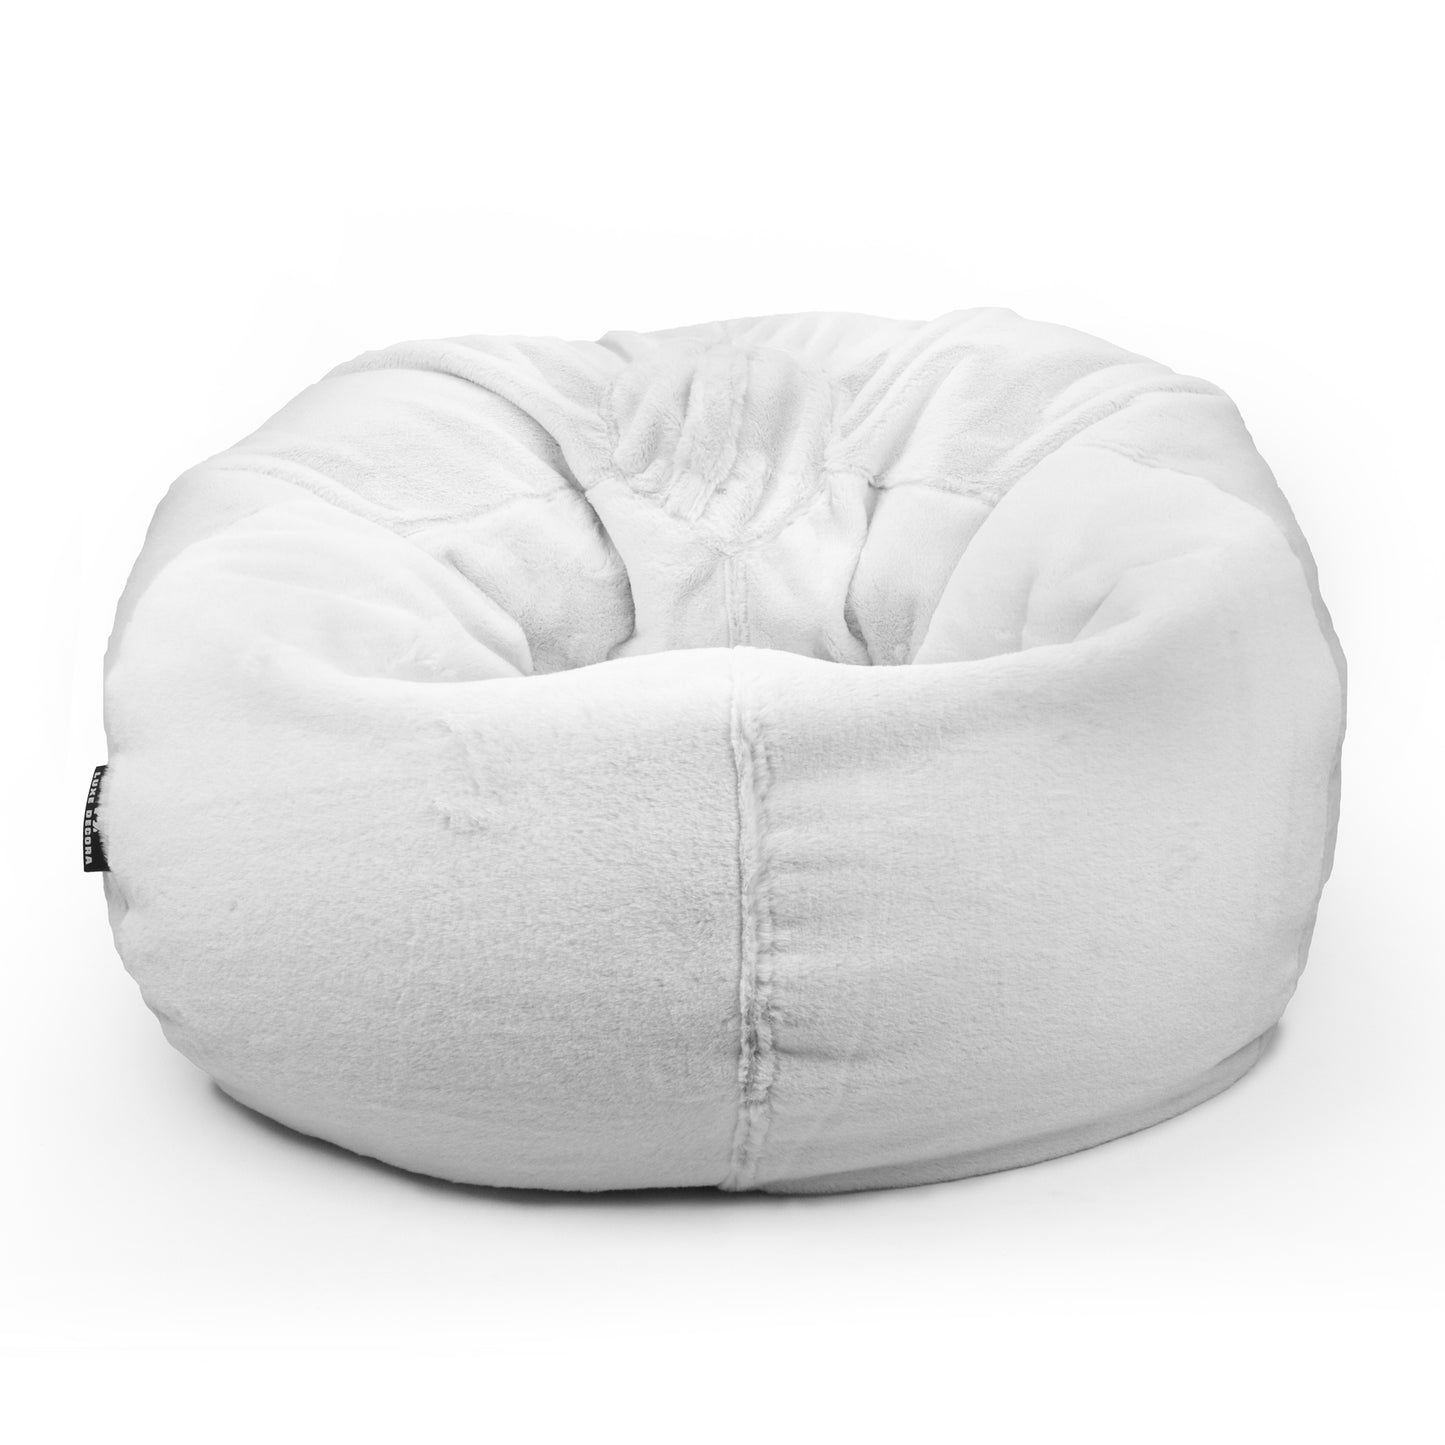 Cocoon - Plush Fur Bean Bag for Ultimate Comfort and Style